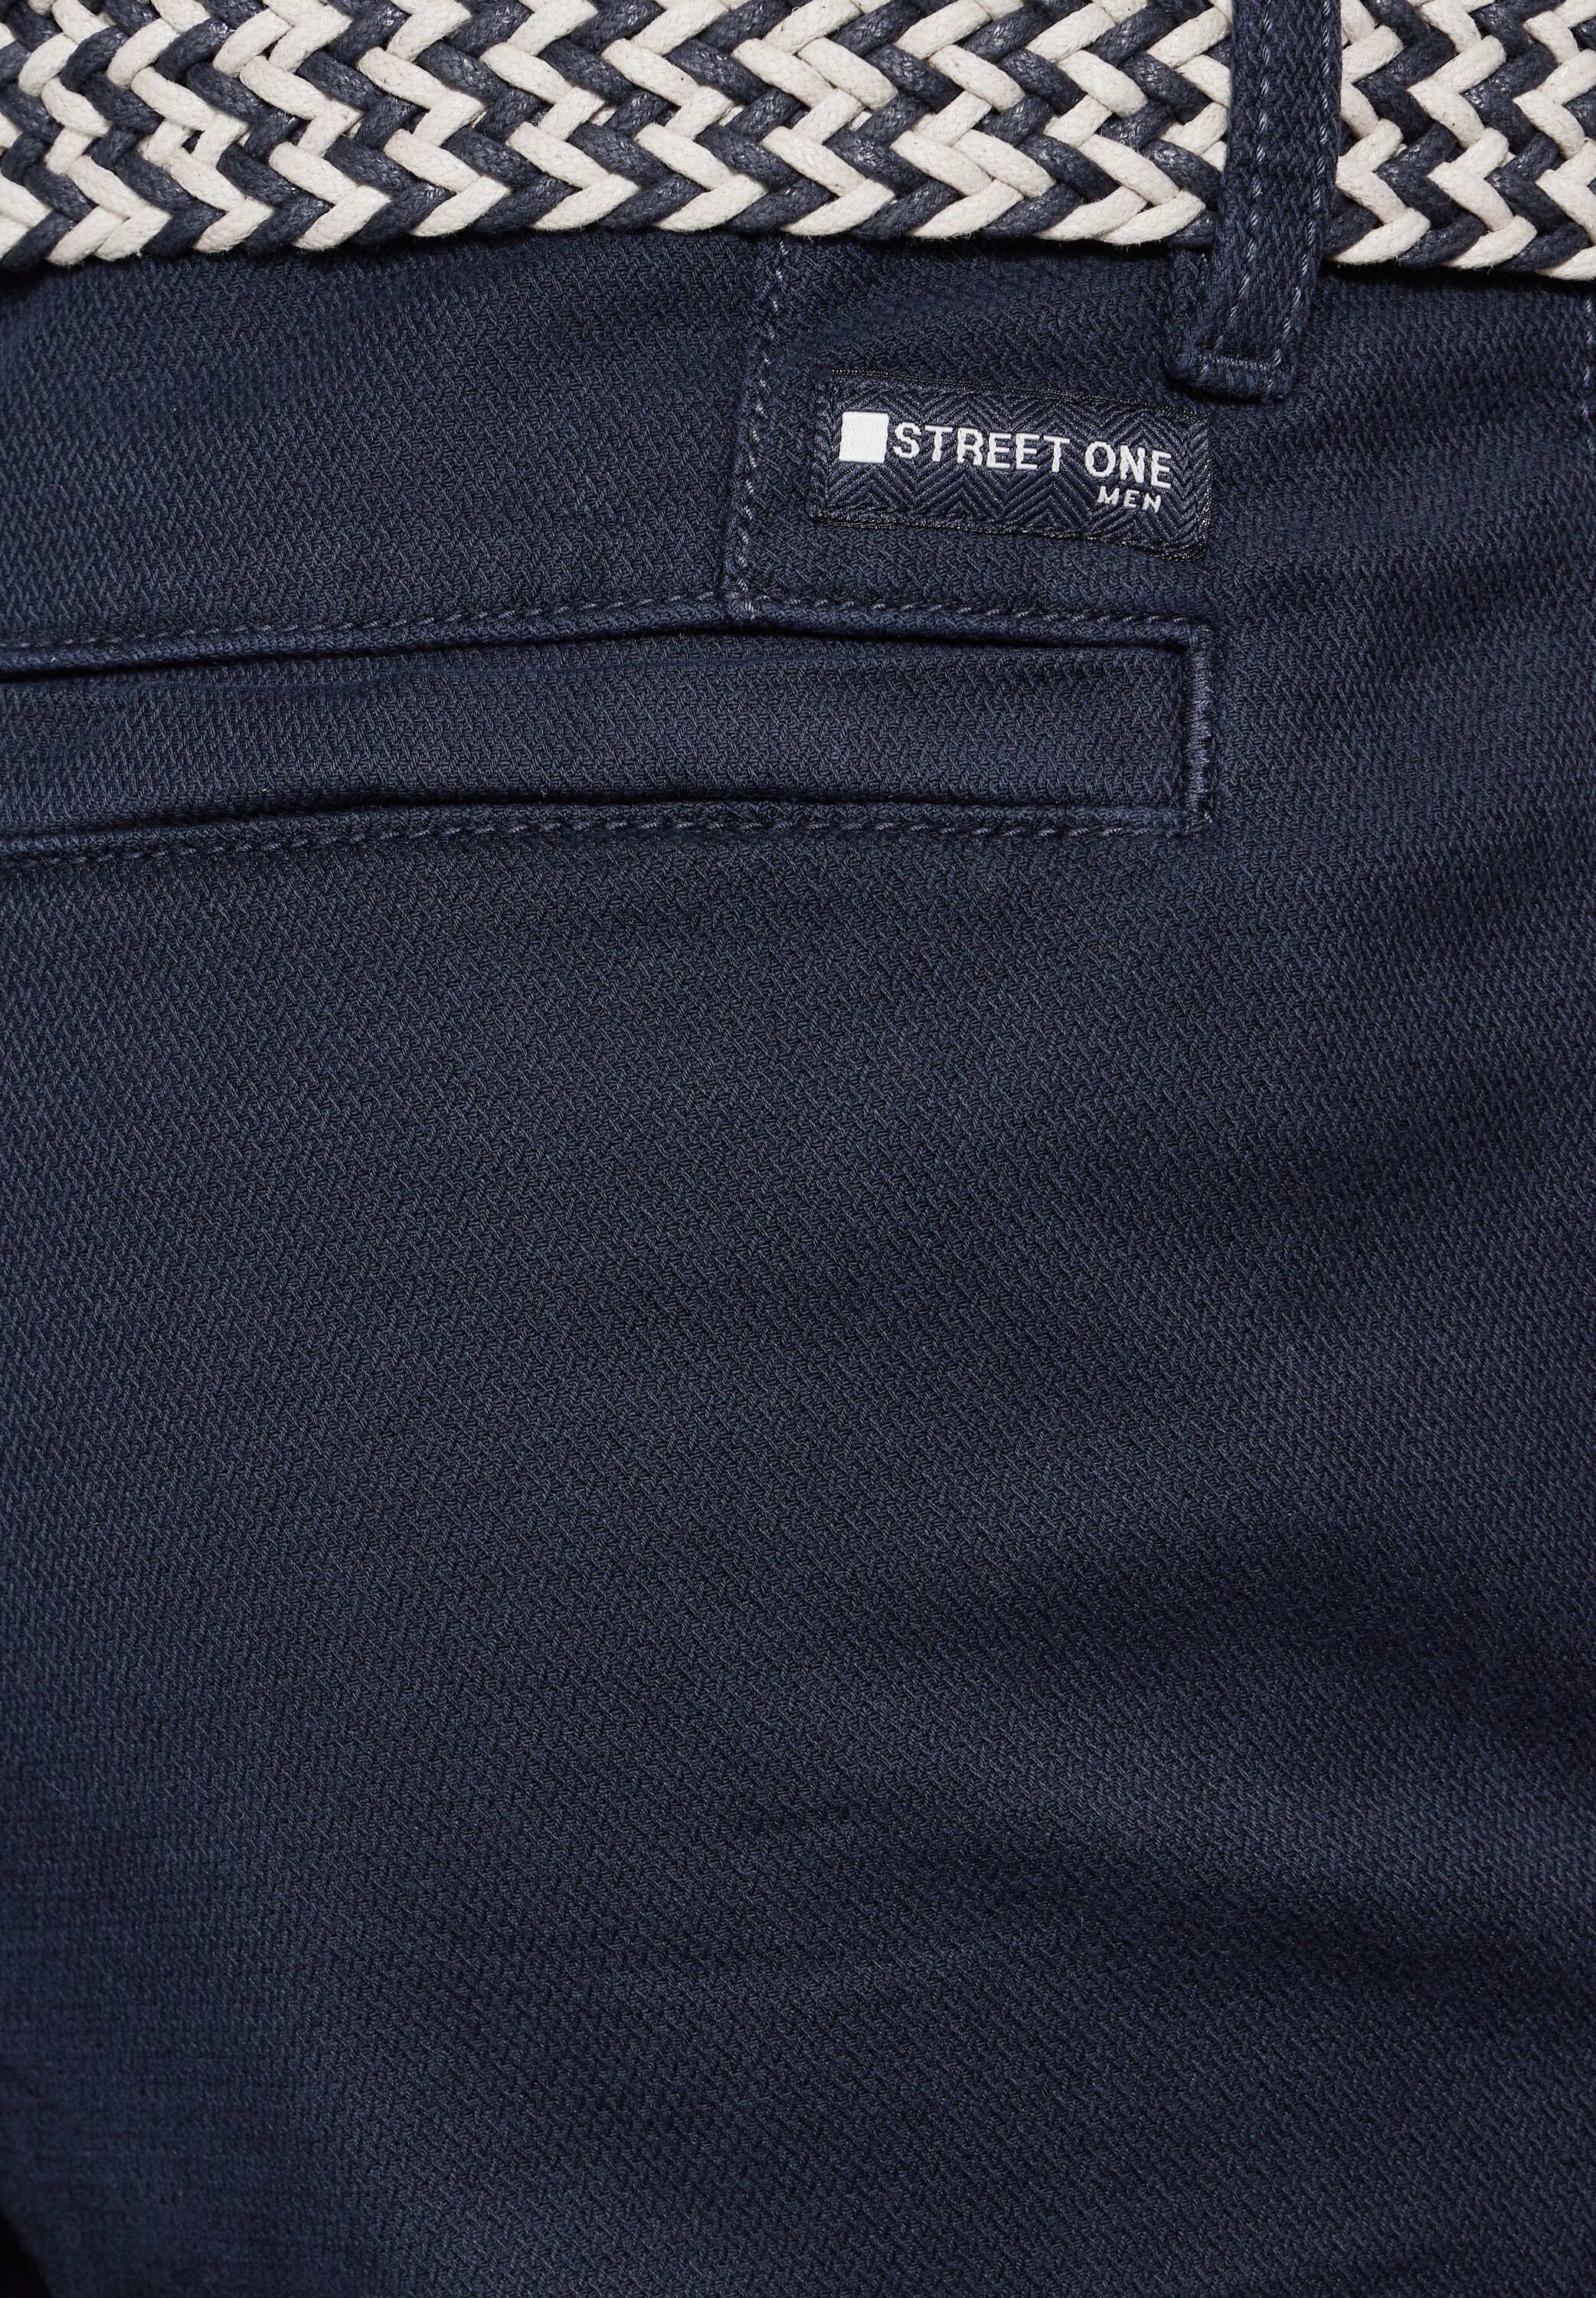 STREET ONE MEN Chinohose, softer Materialmix